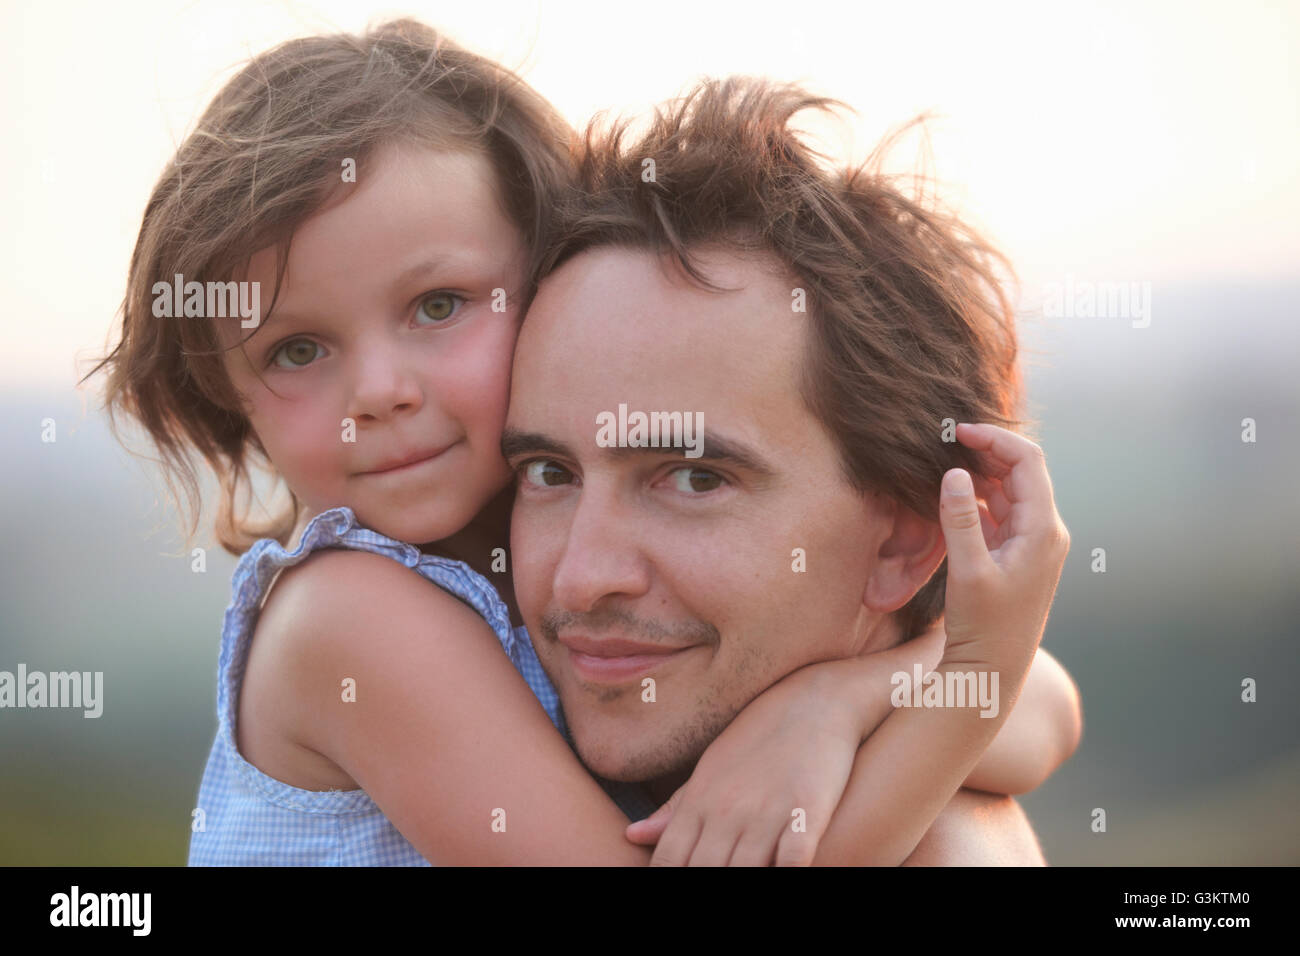 Portrait of girl hugging father, Buonconvento, Tuscany, Italy Stock Photo